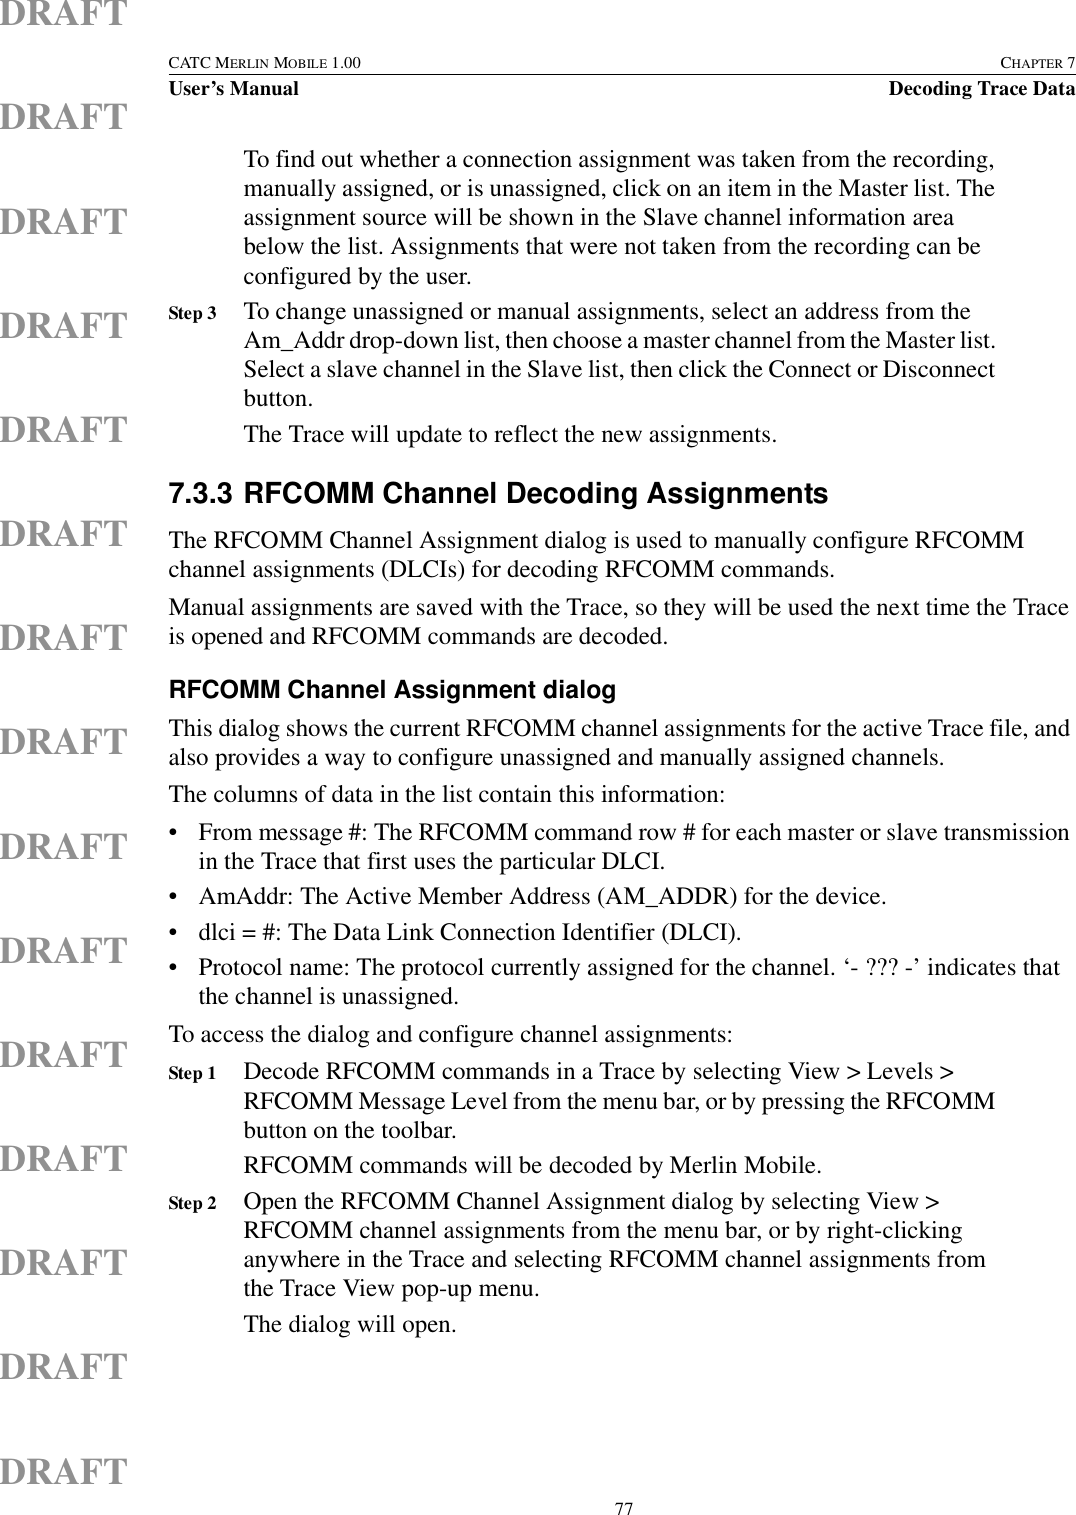  77CATC MERLIN MOBILE 1.00 CHAPTER 7User’s Manual Decoding Trace DataDRAFTDRAFTDRAFTDRAFTDRAFTDRAFTDRAFTDRAFTDRAFTDRAFTDRAFTDRAFTDRAFTDRAFTDRAFTTo find out whether a connection assignment was taken from the recording, manually assigned, or is unassigned, click on an item in the Master list. The assignment source will be shown in the Slave channel information area below the list. Assignments that were not taken from the recording can be configured by the user.Step 3 To change unassigned or manual assignments, select an address from the Am_Addr drop-down list, then choose a master channel from the Master list. Select a slave channel in the Slave list, then click the Connect or Disconnect button.The Trace will update to reflect the new assignments.7.3.3 RFCOMM Channel Decoding AssignmentsThe RFCOMM Channel Assignment dialog is used to manually configure RFCOMM channel assignments (DLCIs) for decoding RFCOMM commands.Manual assignments are saved with the Trace, so they will be used the next time the Trace is opened and RFCOMM commands are decoded.RFCOMM Channel Assignment dialogThis dialog shows the current RFCOMM channel assignments for the active Trace file, and also provides a way to configure unassigned and manually assigned channels.The columns of data in the list contain this information:• From message #: The RFCOMM command row # for each master or slave transmission in the Trace that first uses the particular DLCI.• AmAddr: The Active Member Address (AM_ADDR) for the device.• dlci = #: The Data Link Connection Identifier (DLCI).• Protocol name: The protocol currently assigned for the channel. ‘- ??? -’ indicates that the channel is unassigned.To access the dialog and configure channel assignments:Step 1 Decode RFCOMM commands in a Trace by selecting View &gt; Levels &gt; RFCOMM Message Level from the menu bar, or by pressing the RFCOMM button on the toolbar.RFCOMM commands will be decoded by Merlin Mobile.Step 2 Open the RFCOMM Channel Assignment dialog by selecting View &gt; RFCOMM channel assignments from the menu bar, or by right-clicking anywhere in the Trace and selecting RFCOMM channel assignments from the Trace View pop-up menu.The dialog will open.